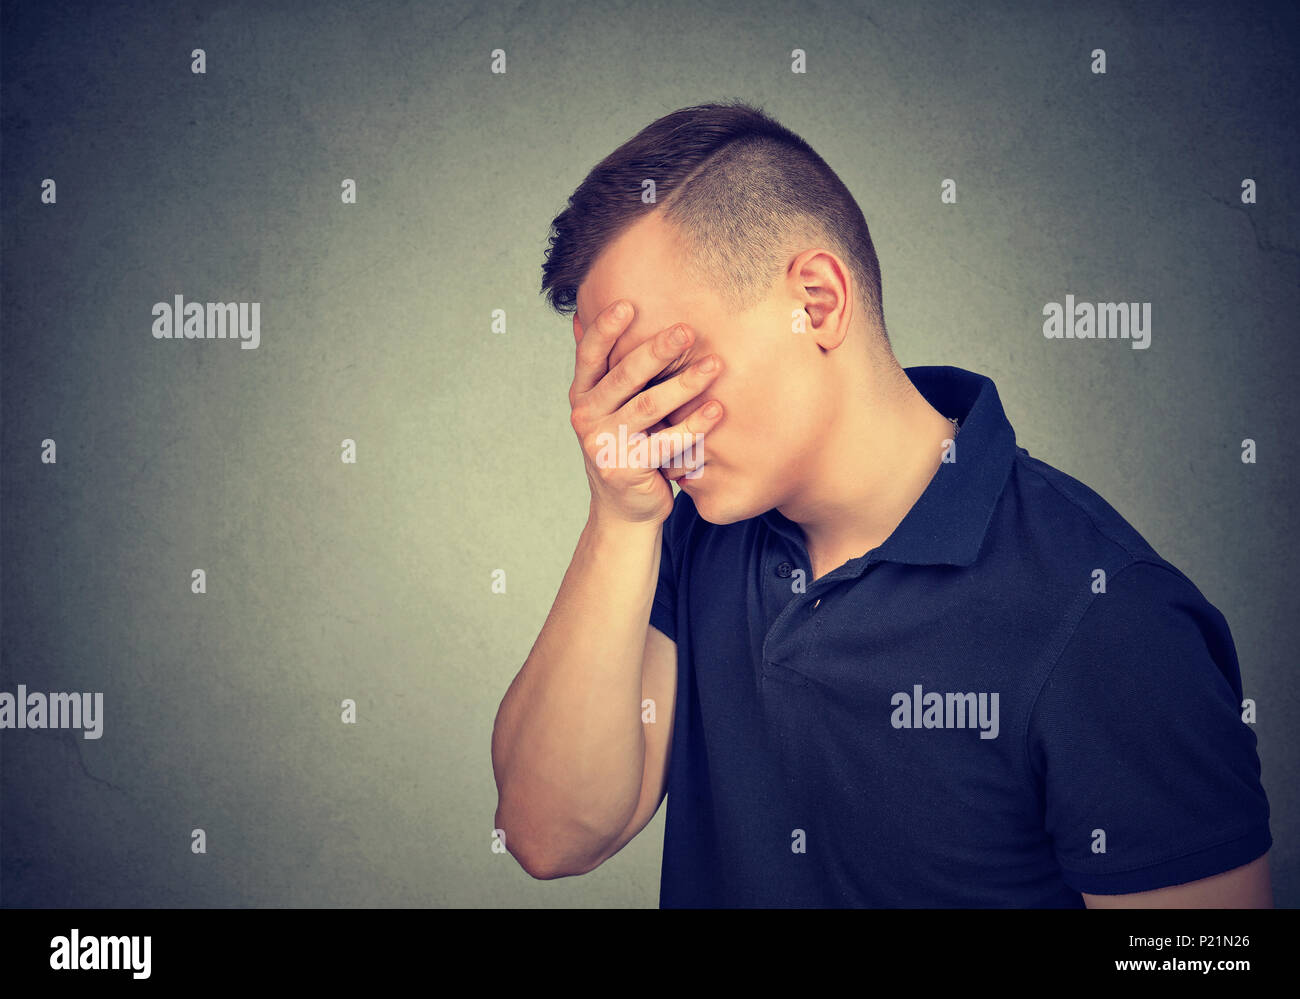 Sad depressed man with hand on face looking down Stock Photo